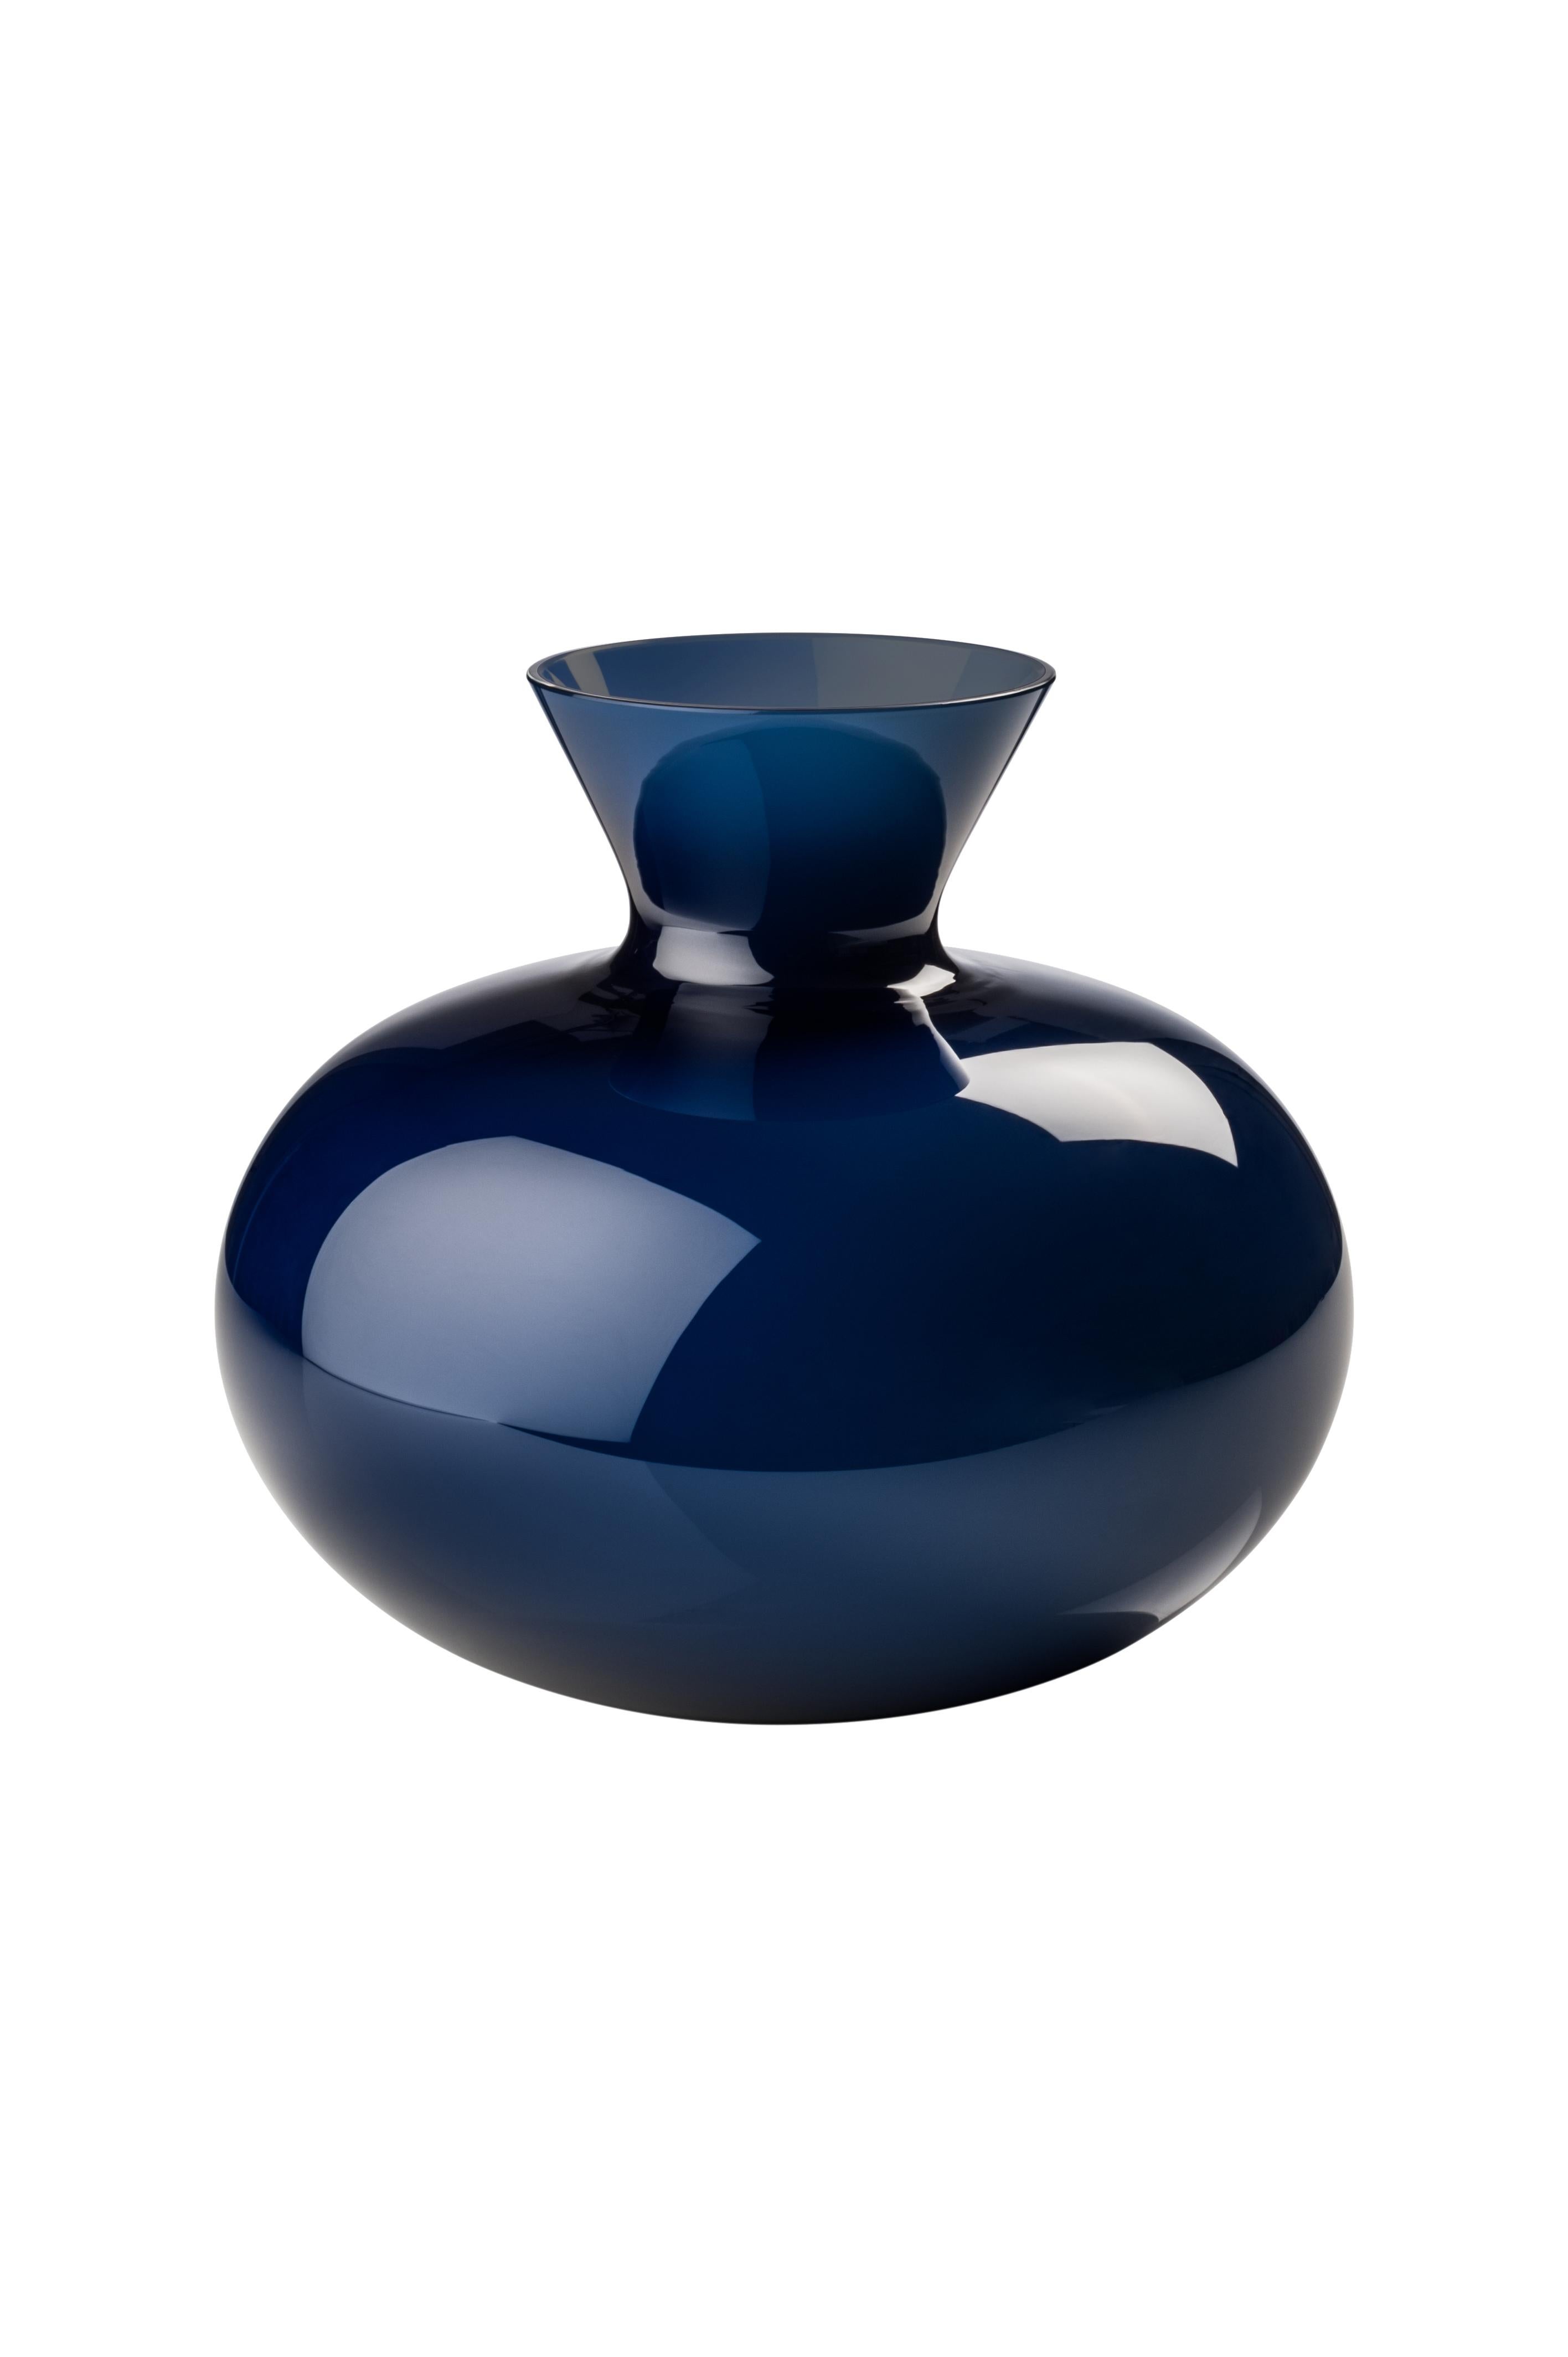 Venini glass vase with round body and angular shaped neck in blue marine designed in 2016. Perfect for indoor home decor as container or strong statement piece for any room. Also available in other colors on 1stdibs.

Dimensions: 30 cm diameter x